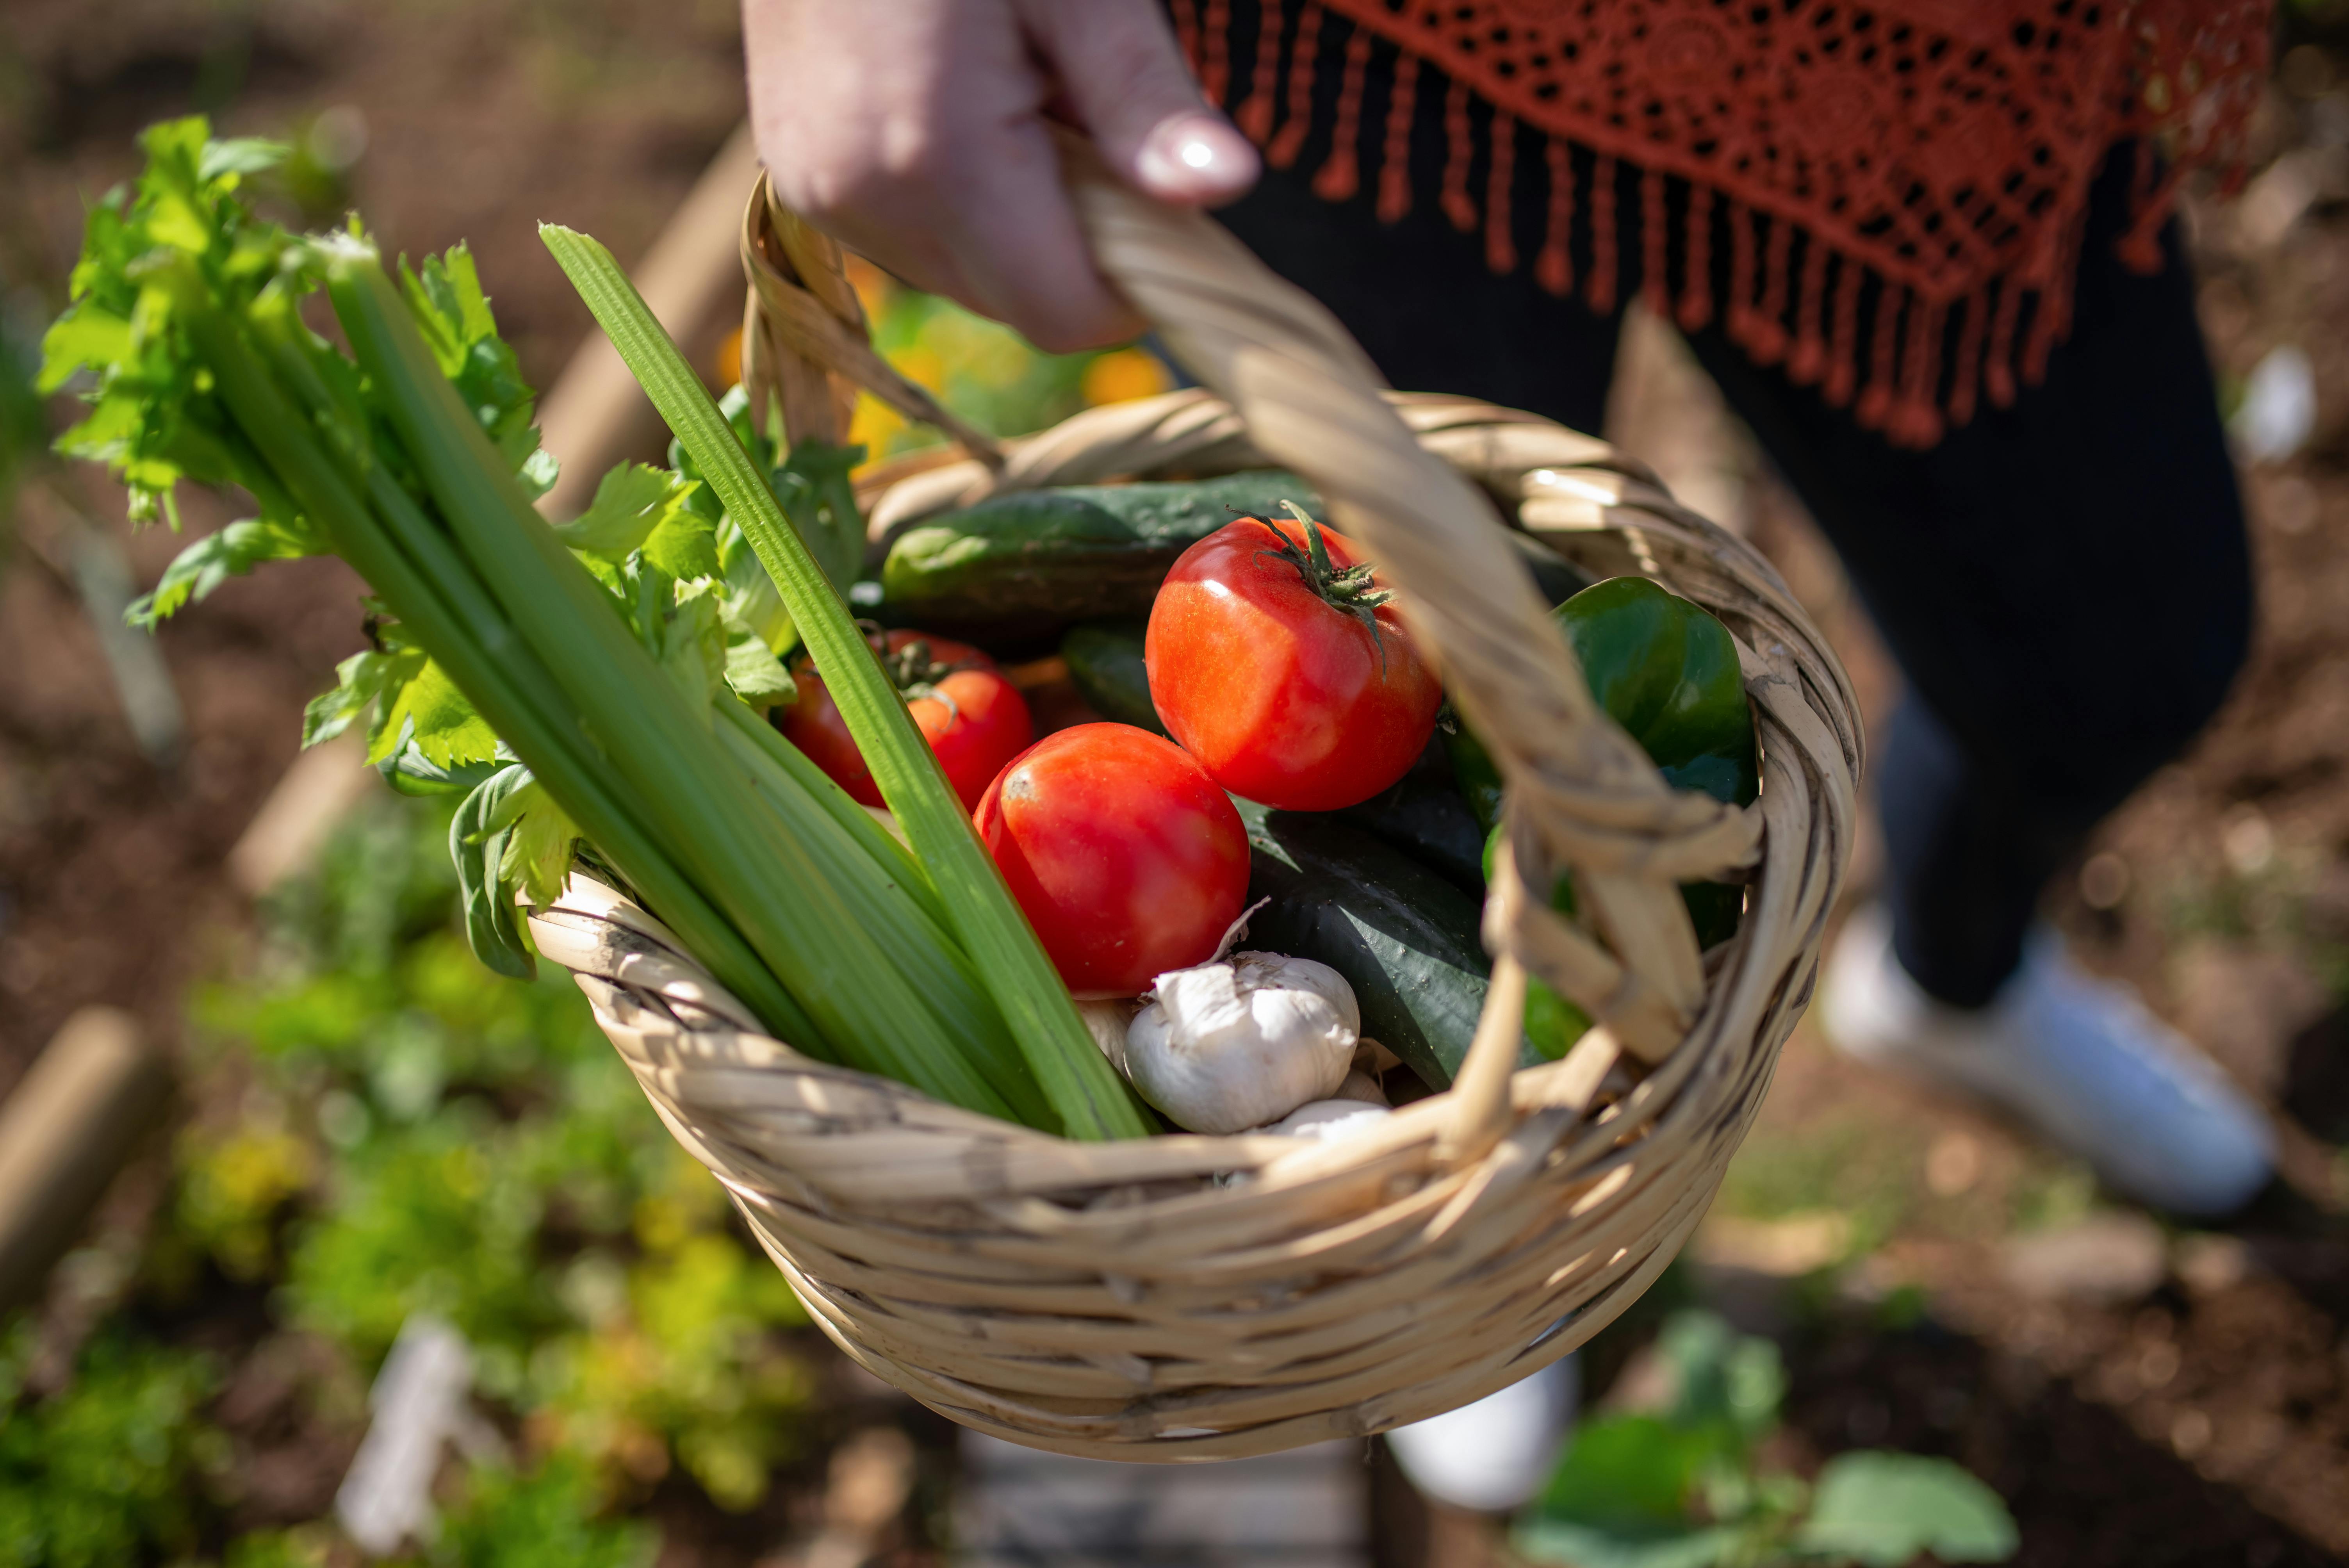 Basket of fresh vegetables in a garden, symbolizing home gardening and sustainable living.